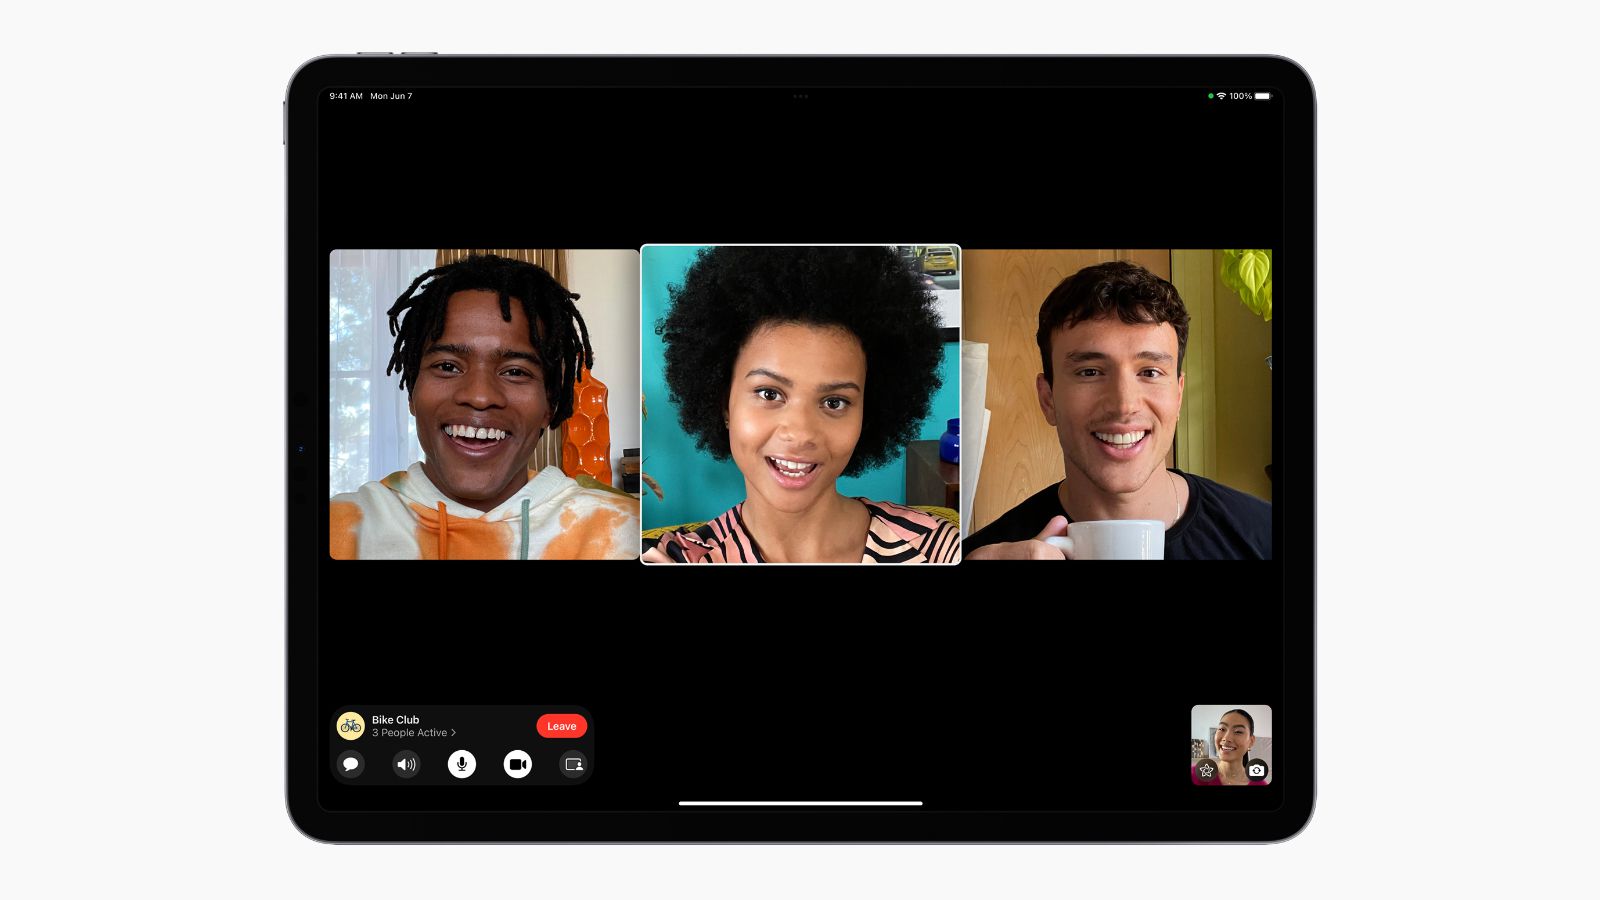 iOS 15: How to Enable Voice Isolation Mode in FaceTime - MacRumors